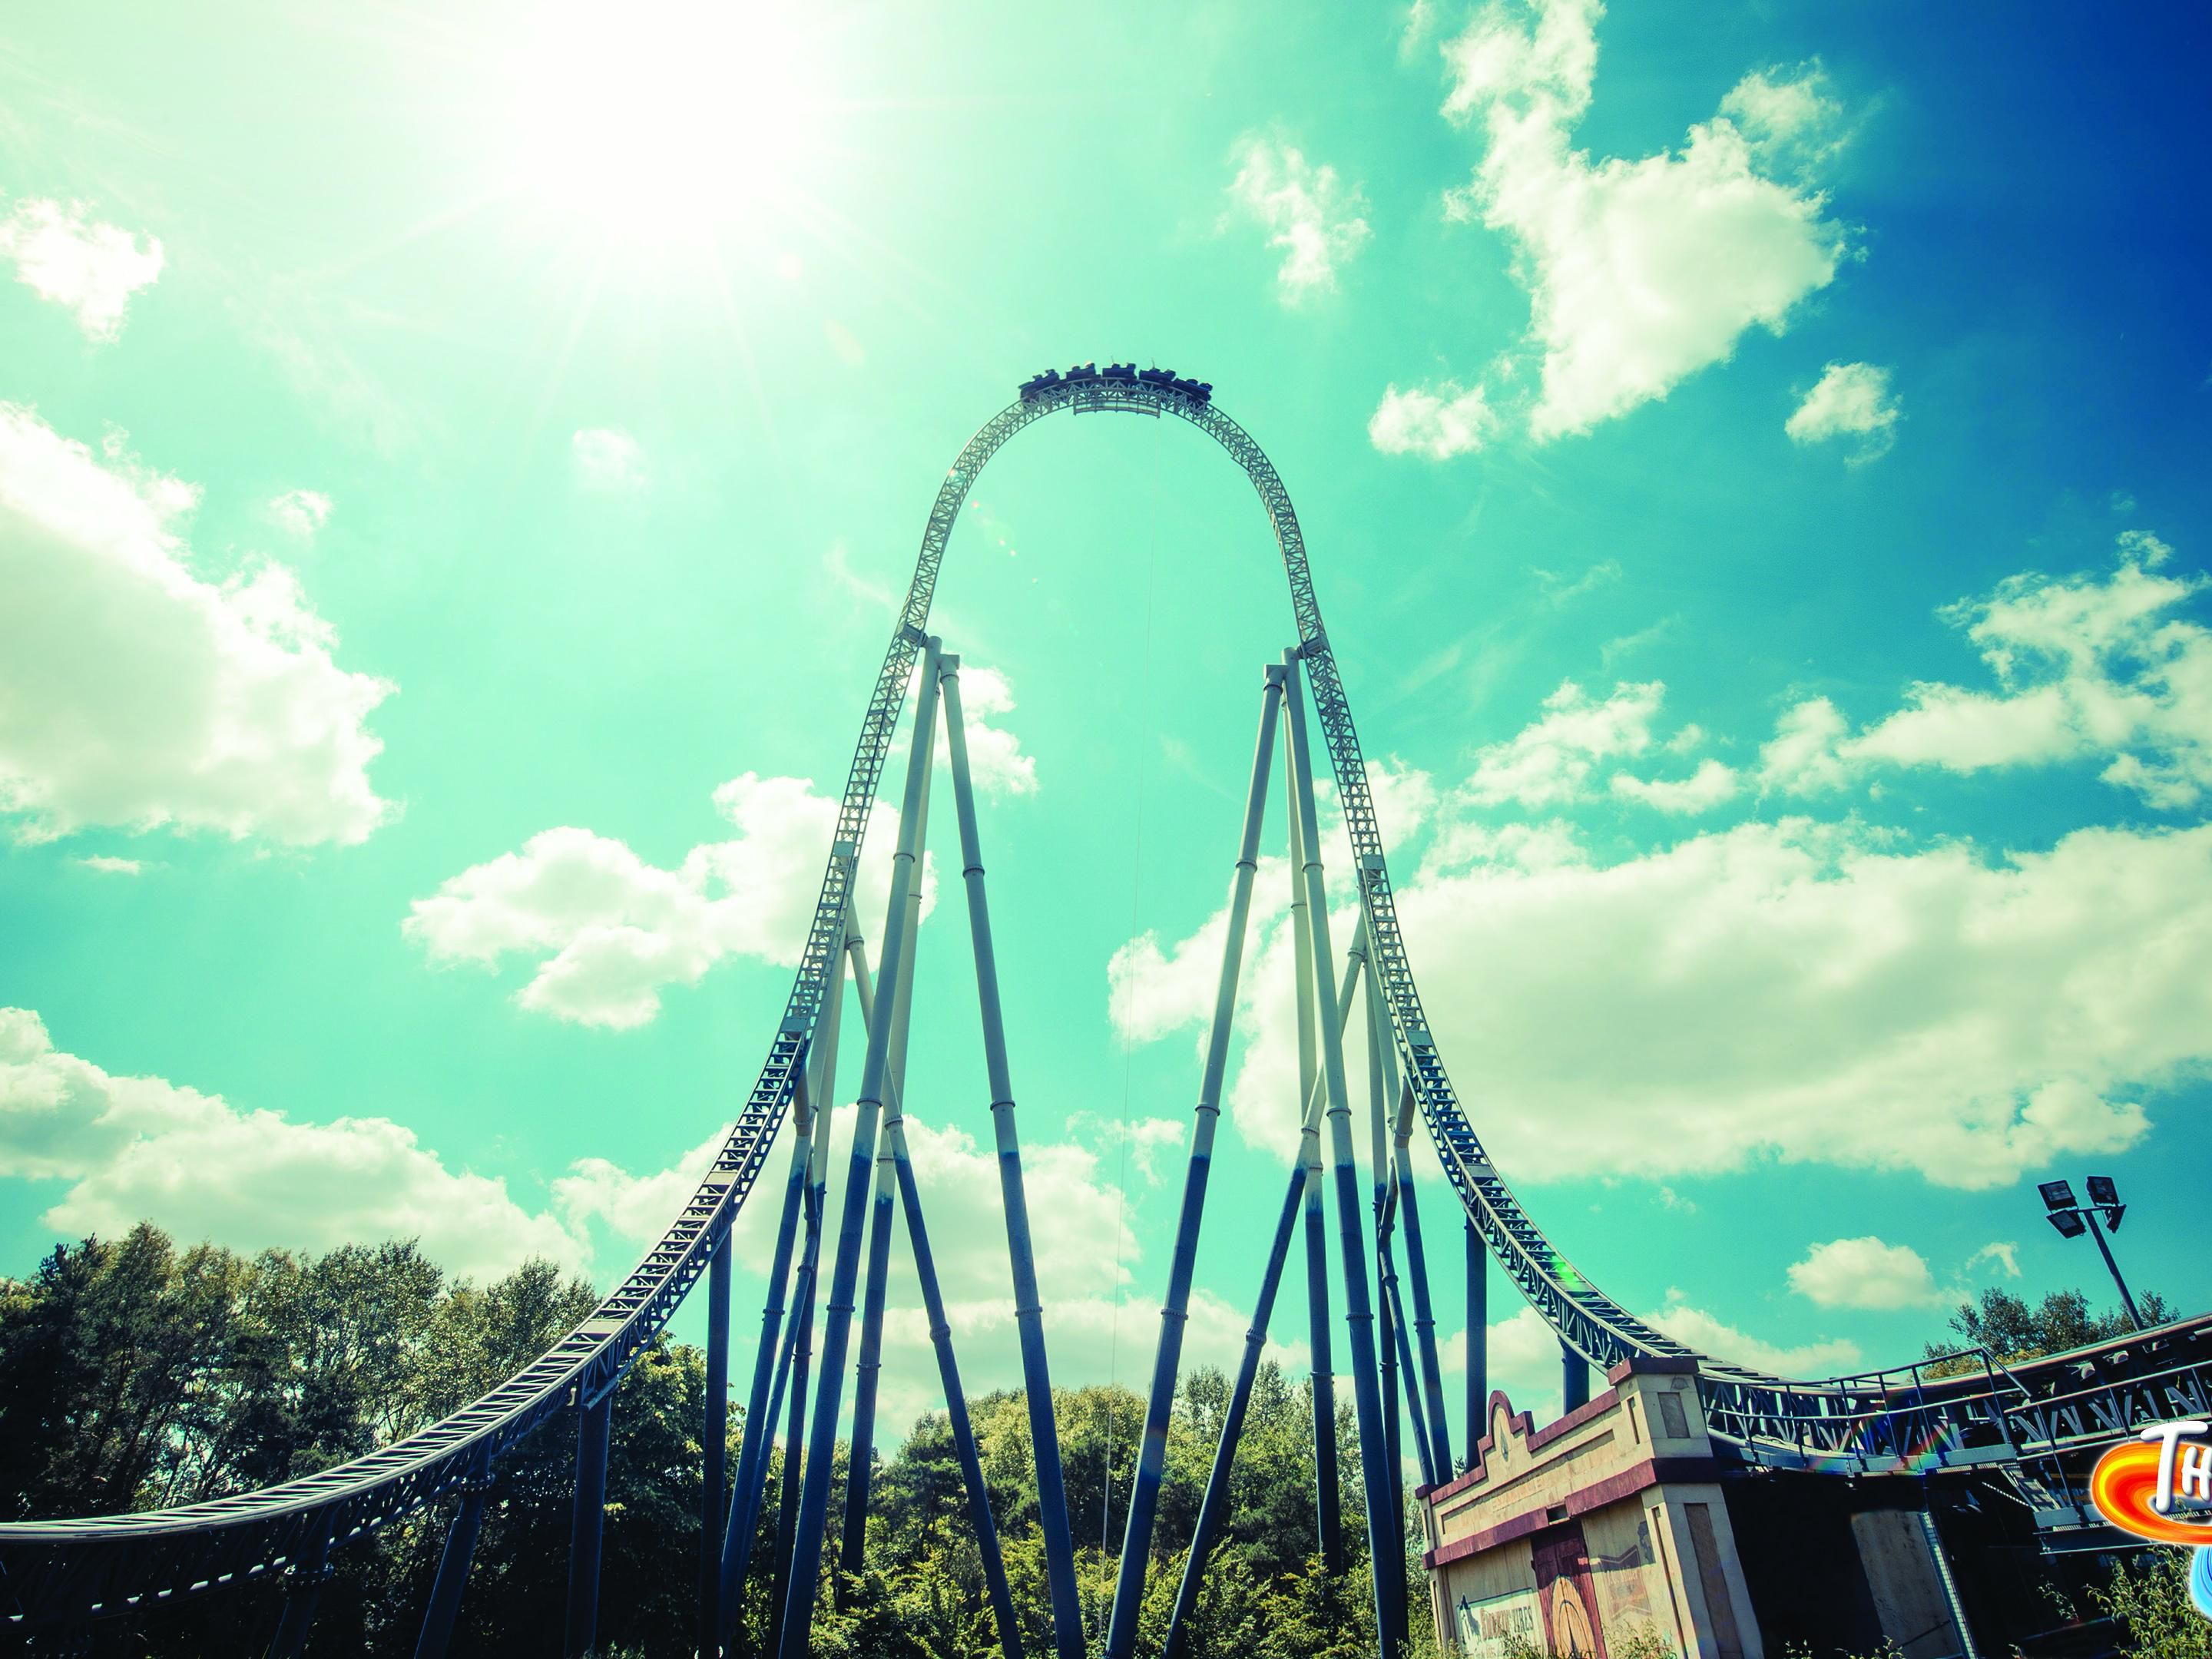 With Thorpe Park and Chessington World of Adventures less than half an hour’s drive and Legoland Windsor Resort just 40 minutes away, Holiday Inn Guildford is the perfect base for thrill-seekers looking for the latest adrenaline-fueled ride! 